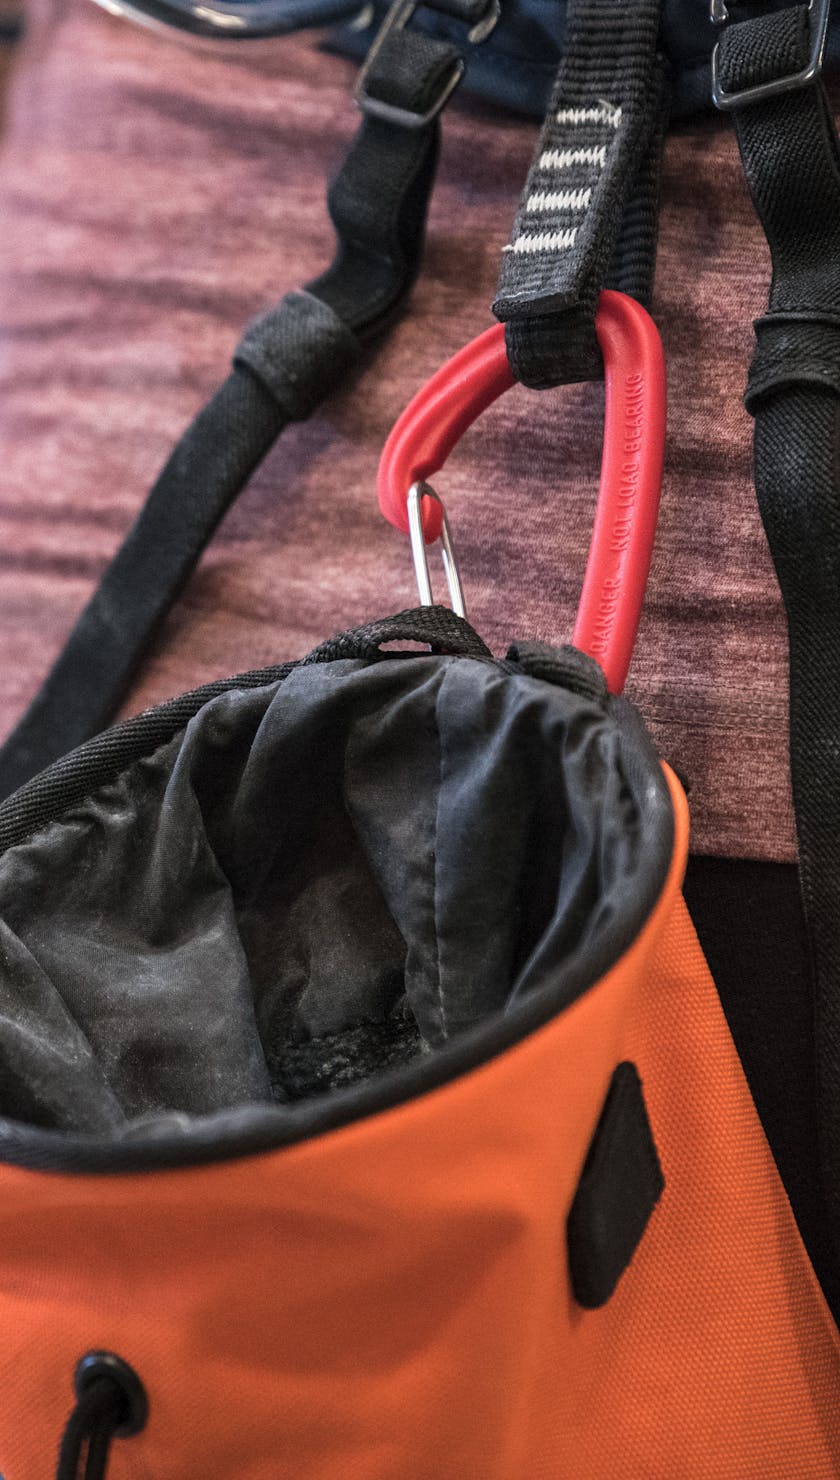 How to Choose the Best Chalk Bags & Climbing Chalk